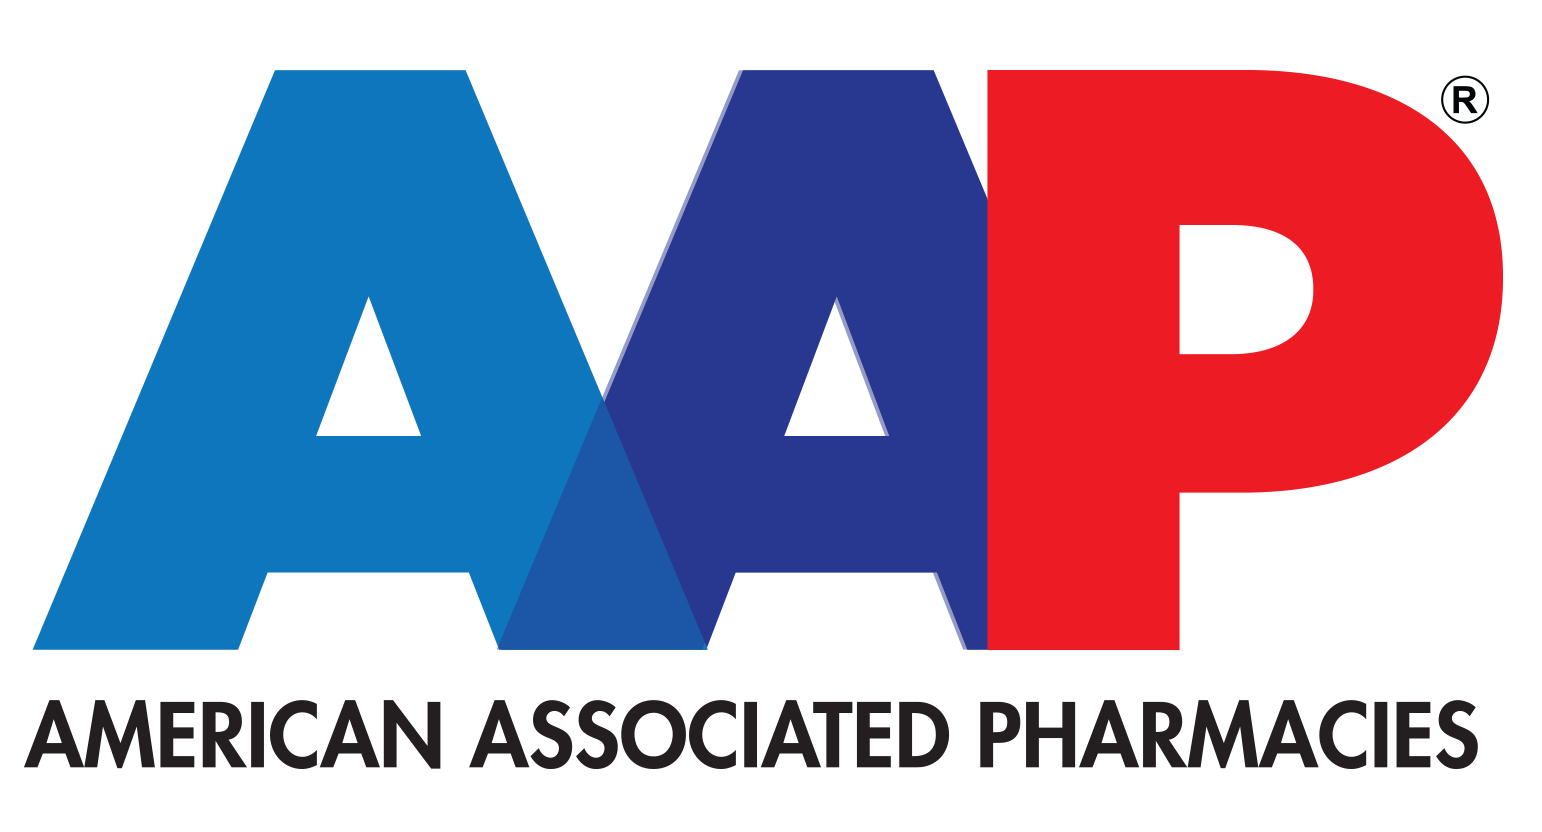 Transform With American Associated Pharmacies at the 2022 Annual Conference